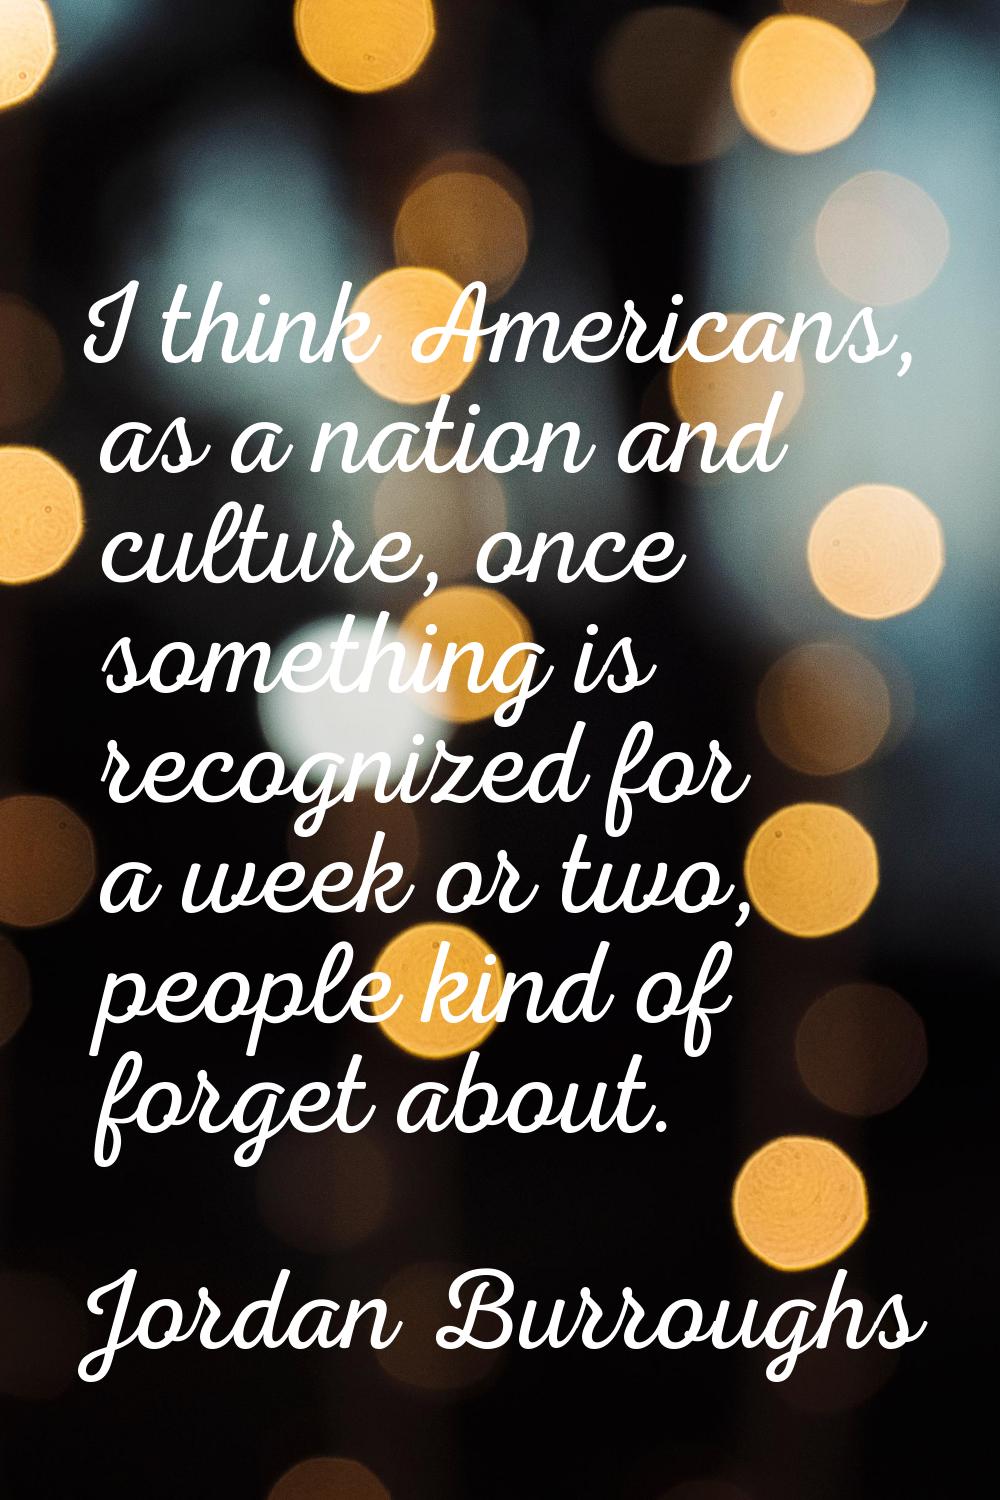 I think Americans, as a nation and culture, once something is recognized for a week or two, people 